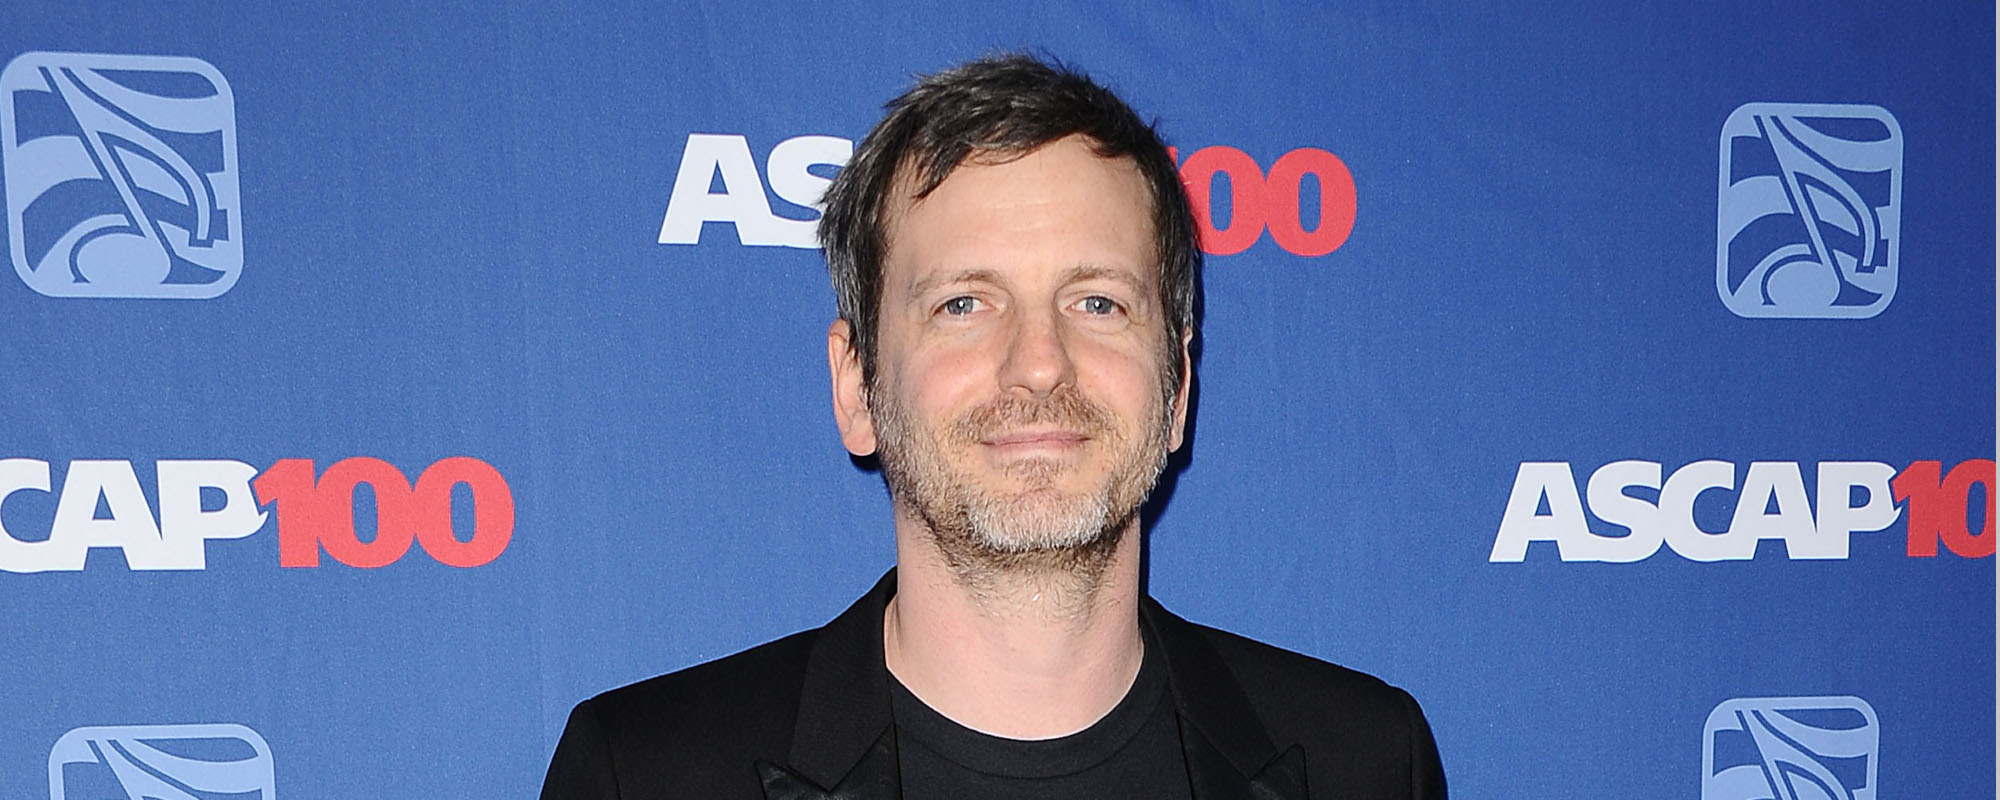 Dr. Luke Dubbed Songwriter of the Year by ASCAP Amid Suit with Kesha